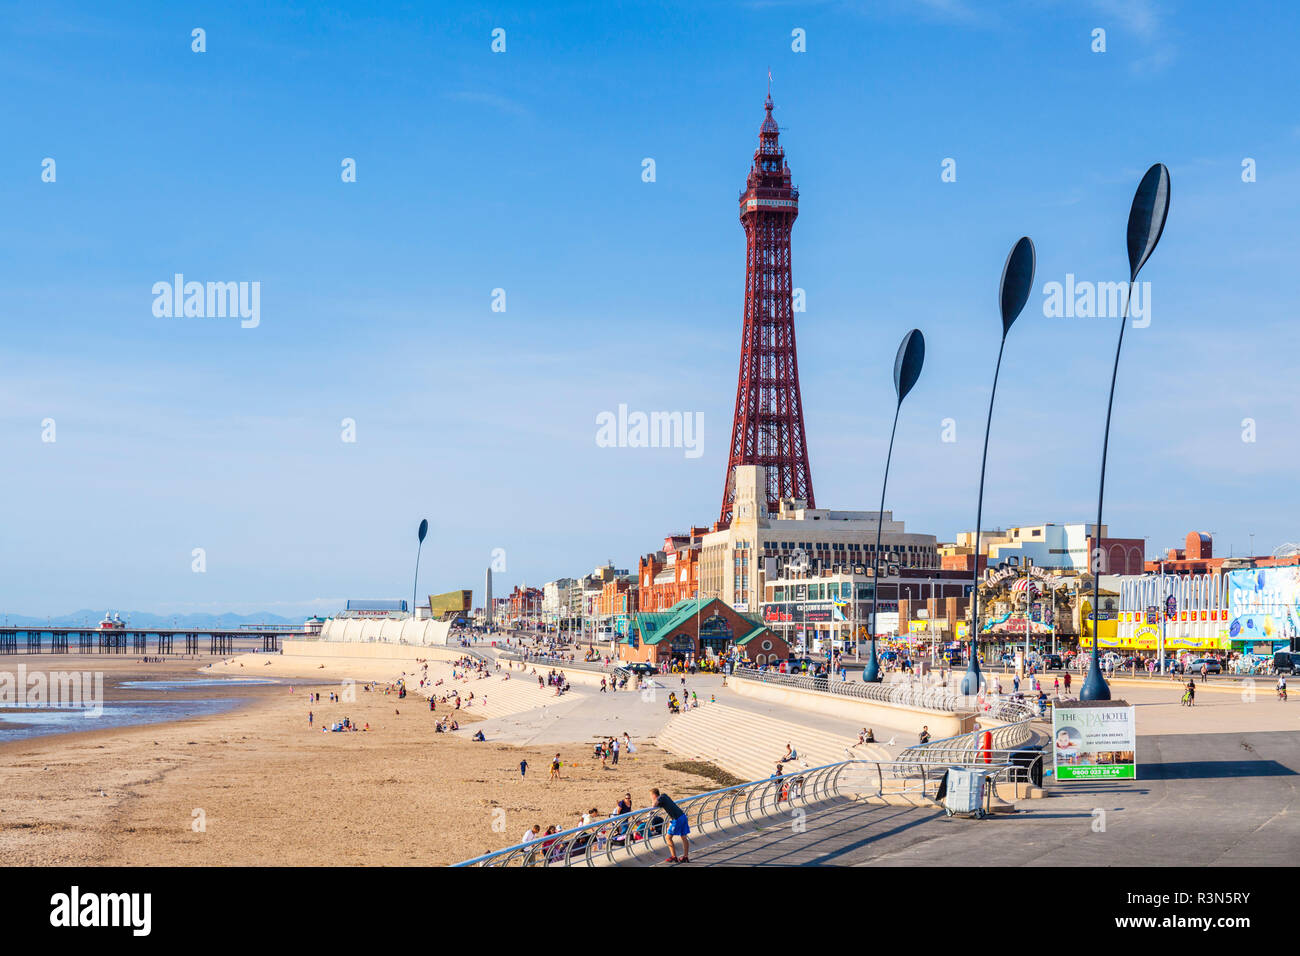 Blackpool tower Blackpool beach and seafront promenade with holidaymakers sat on the beach and steps Blackpool Lancashire England GB UK Europe Stock Photo